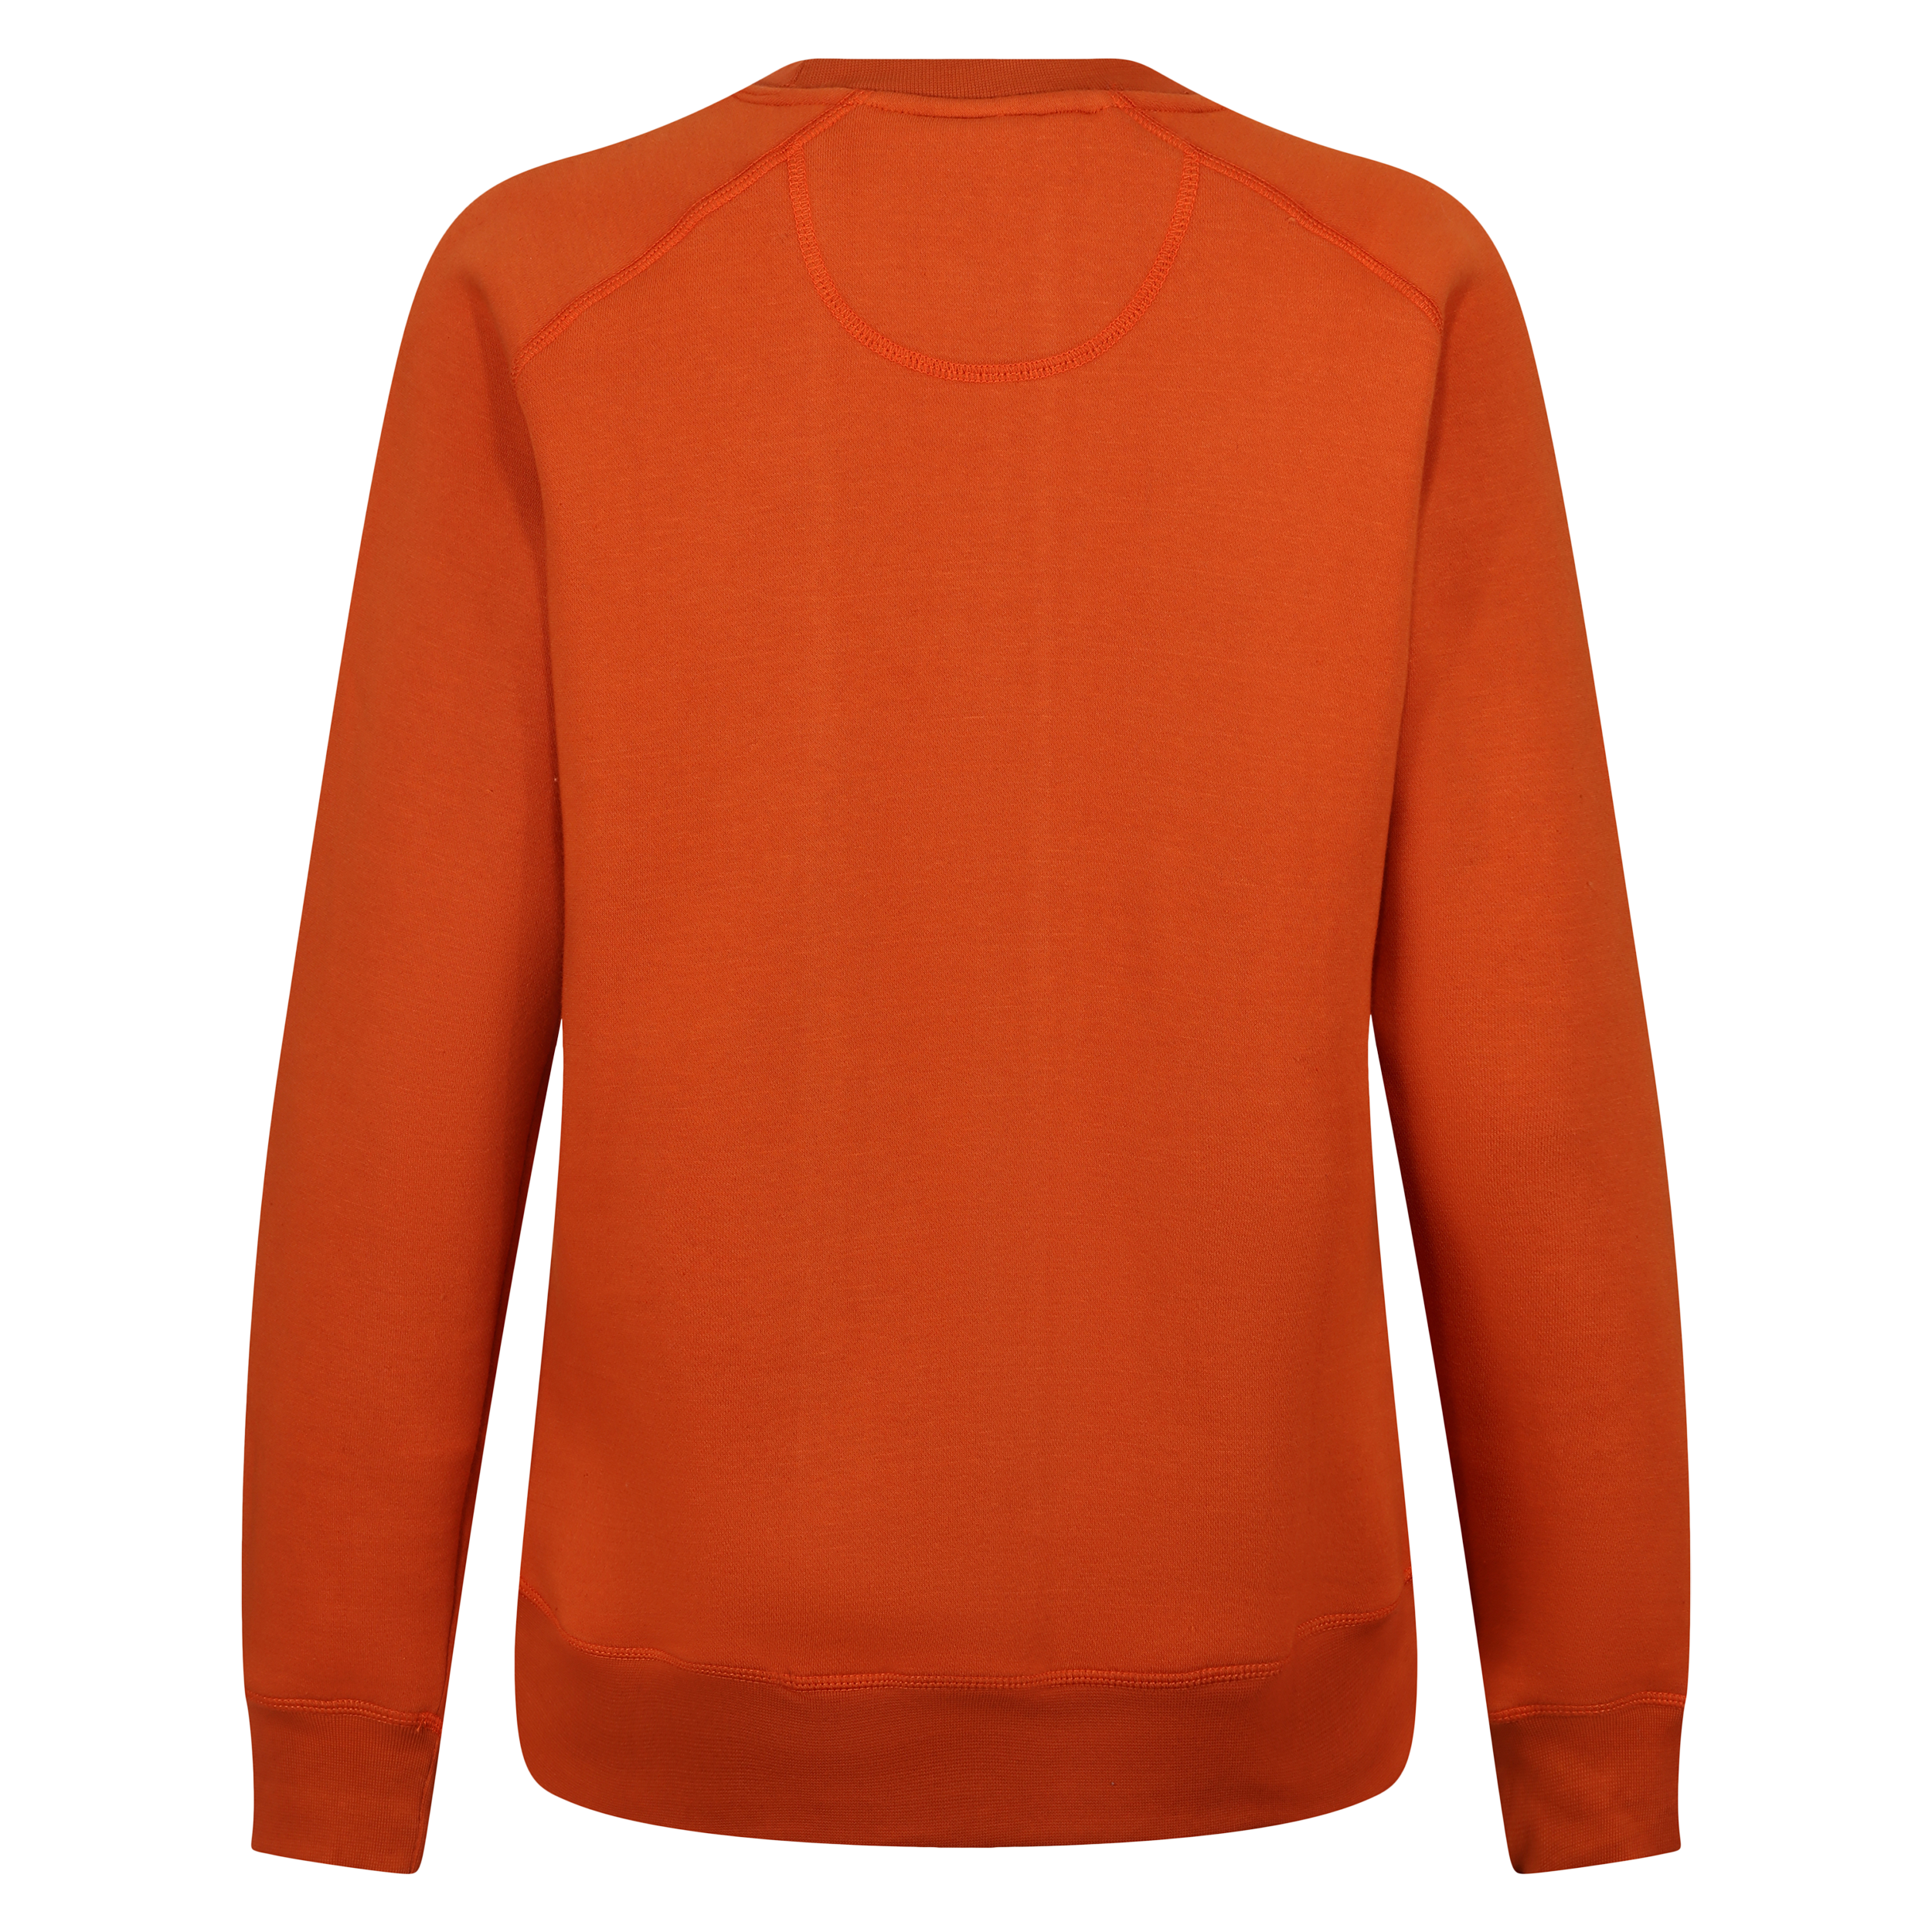 The back of an orange colour lady sweatshirt with Moto Girl 3D logo